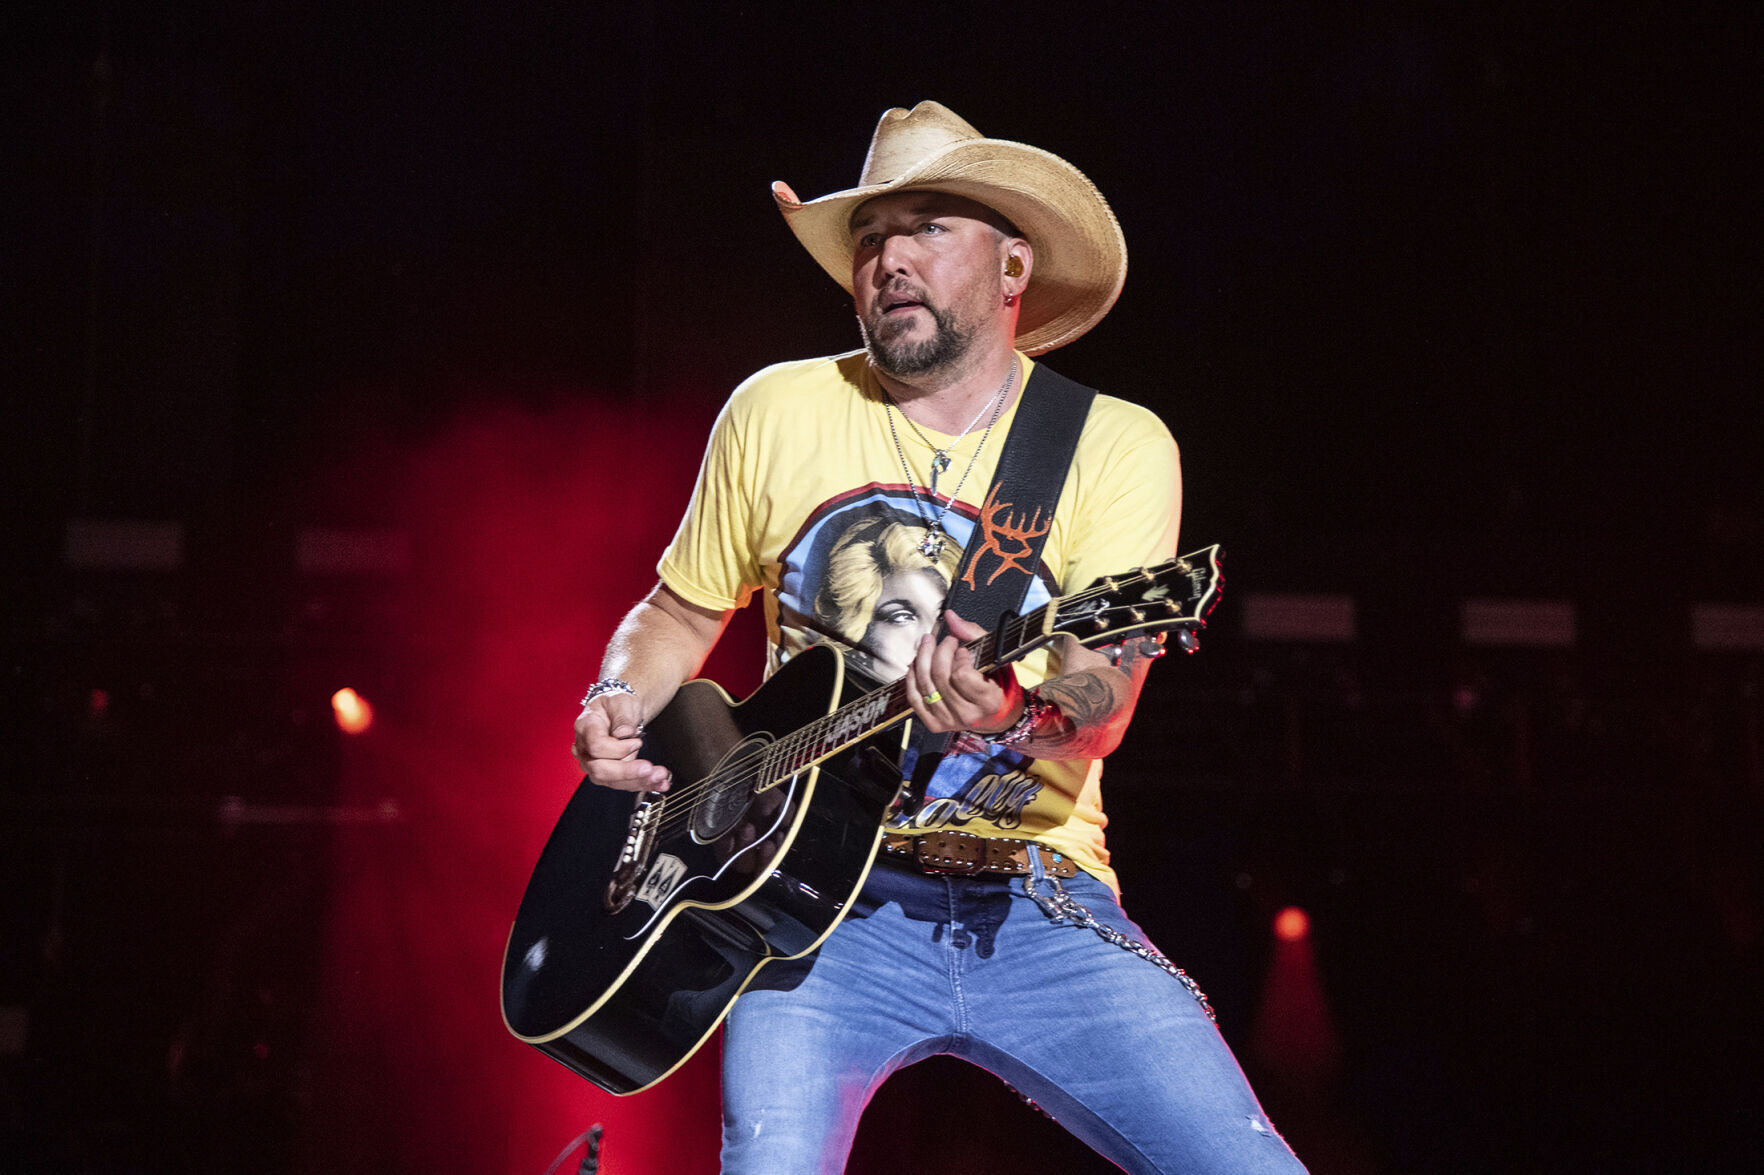 CMT pulls video for Jason Aldean's controversial song, Trump target